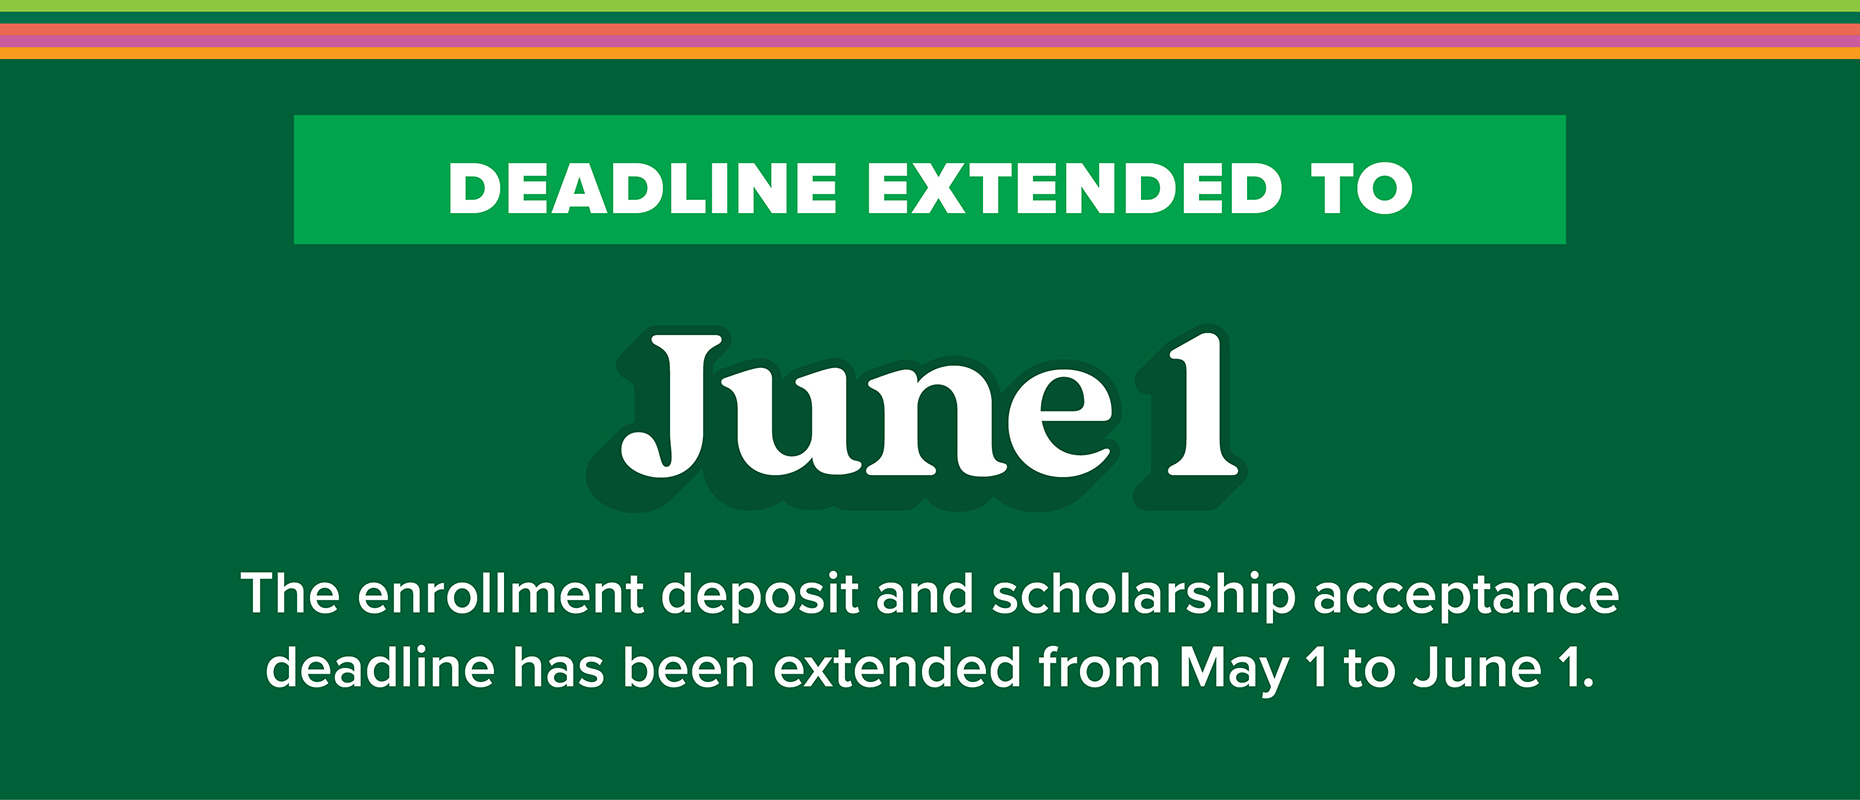 Deadline extended to June 1: The enrollment deposit and scholarship acceptance deadline has been extended from May 1 to June 1.